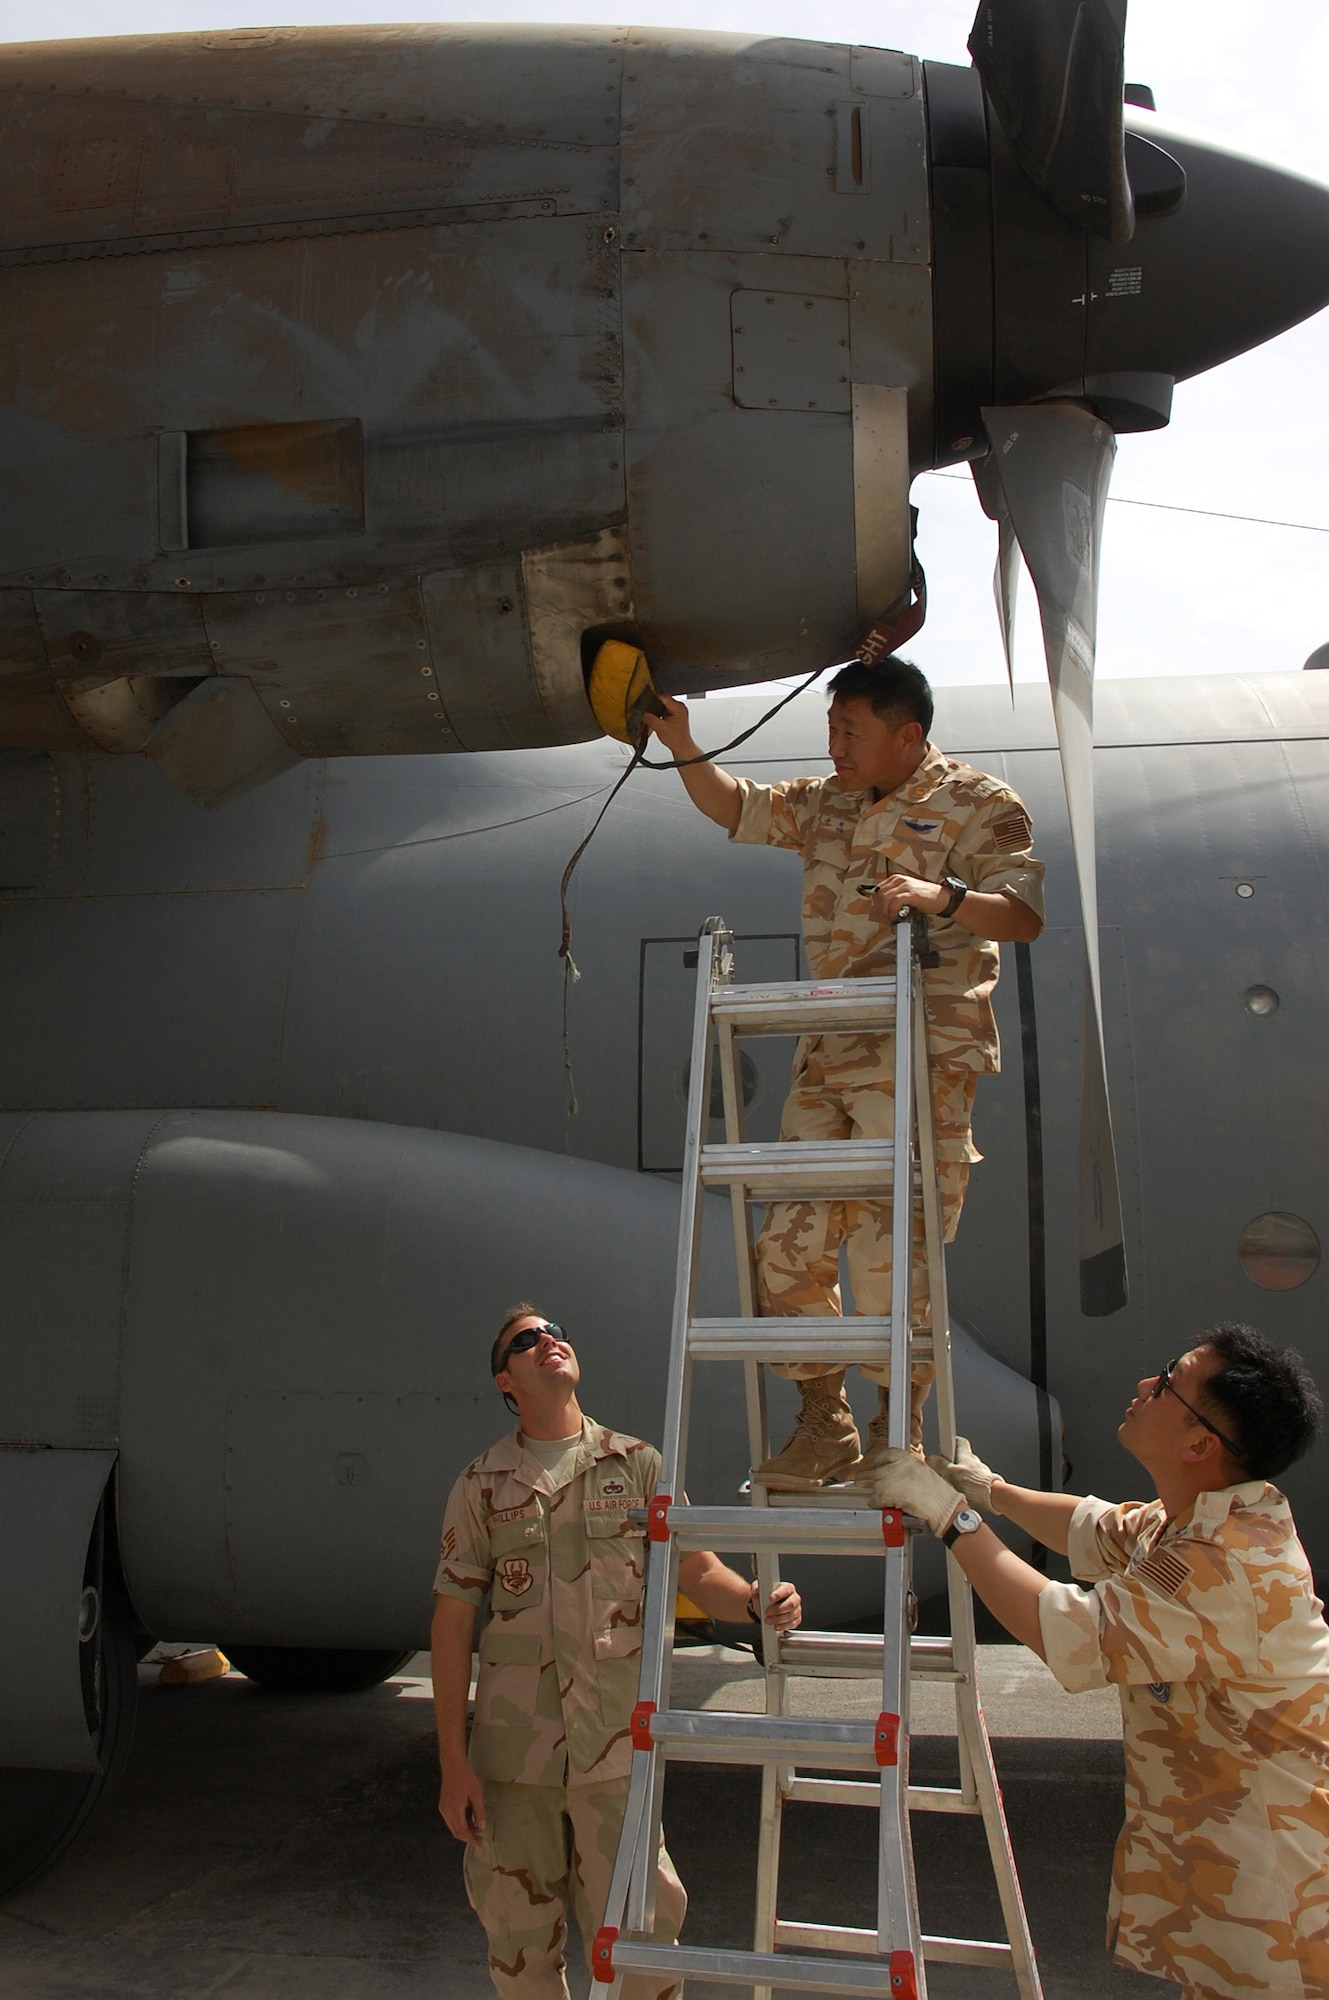 SOUTHWEST ASIA -- Warrant Officer Hae Ok Yoon (center) inserts an oil cooler intake plug into a U.S. Air Force C-130 Hercules while Staff Sgt. William Phillips (left) and Master Sgt. Jun Wan Park keep the ladder steady for him March 26, 2008, at an air base in the Persian Gulf Region. Warrant Officer Yoon and Sergeant Park are from the Republic of Korea Air Force 58th Airlift Wing, and Sergeant Phillips is a crew chief deployed to the 386th Expeditionary Aircraft Maintenance Squadron. Airmen from the U.S., ROKAF, and Japan Air Self Defense Force Iraq Reconstruction Support Airlift Wing participated in a coalition maintenance exchange program allowing maintainers to sharpen their skills, exchange ideas, and promote closer relations among coalition air forces supporting the Global War on Terrorism. (U.S. Air Force photo/ Staff Sgt. Patrick Dixon)